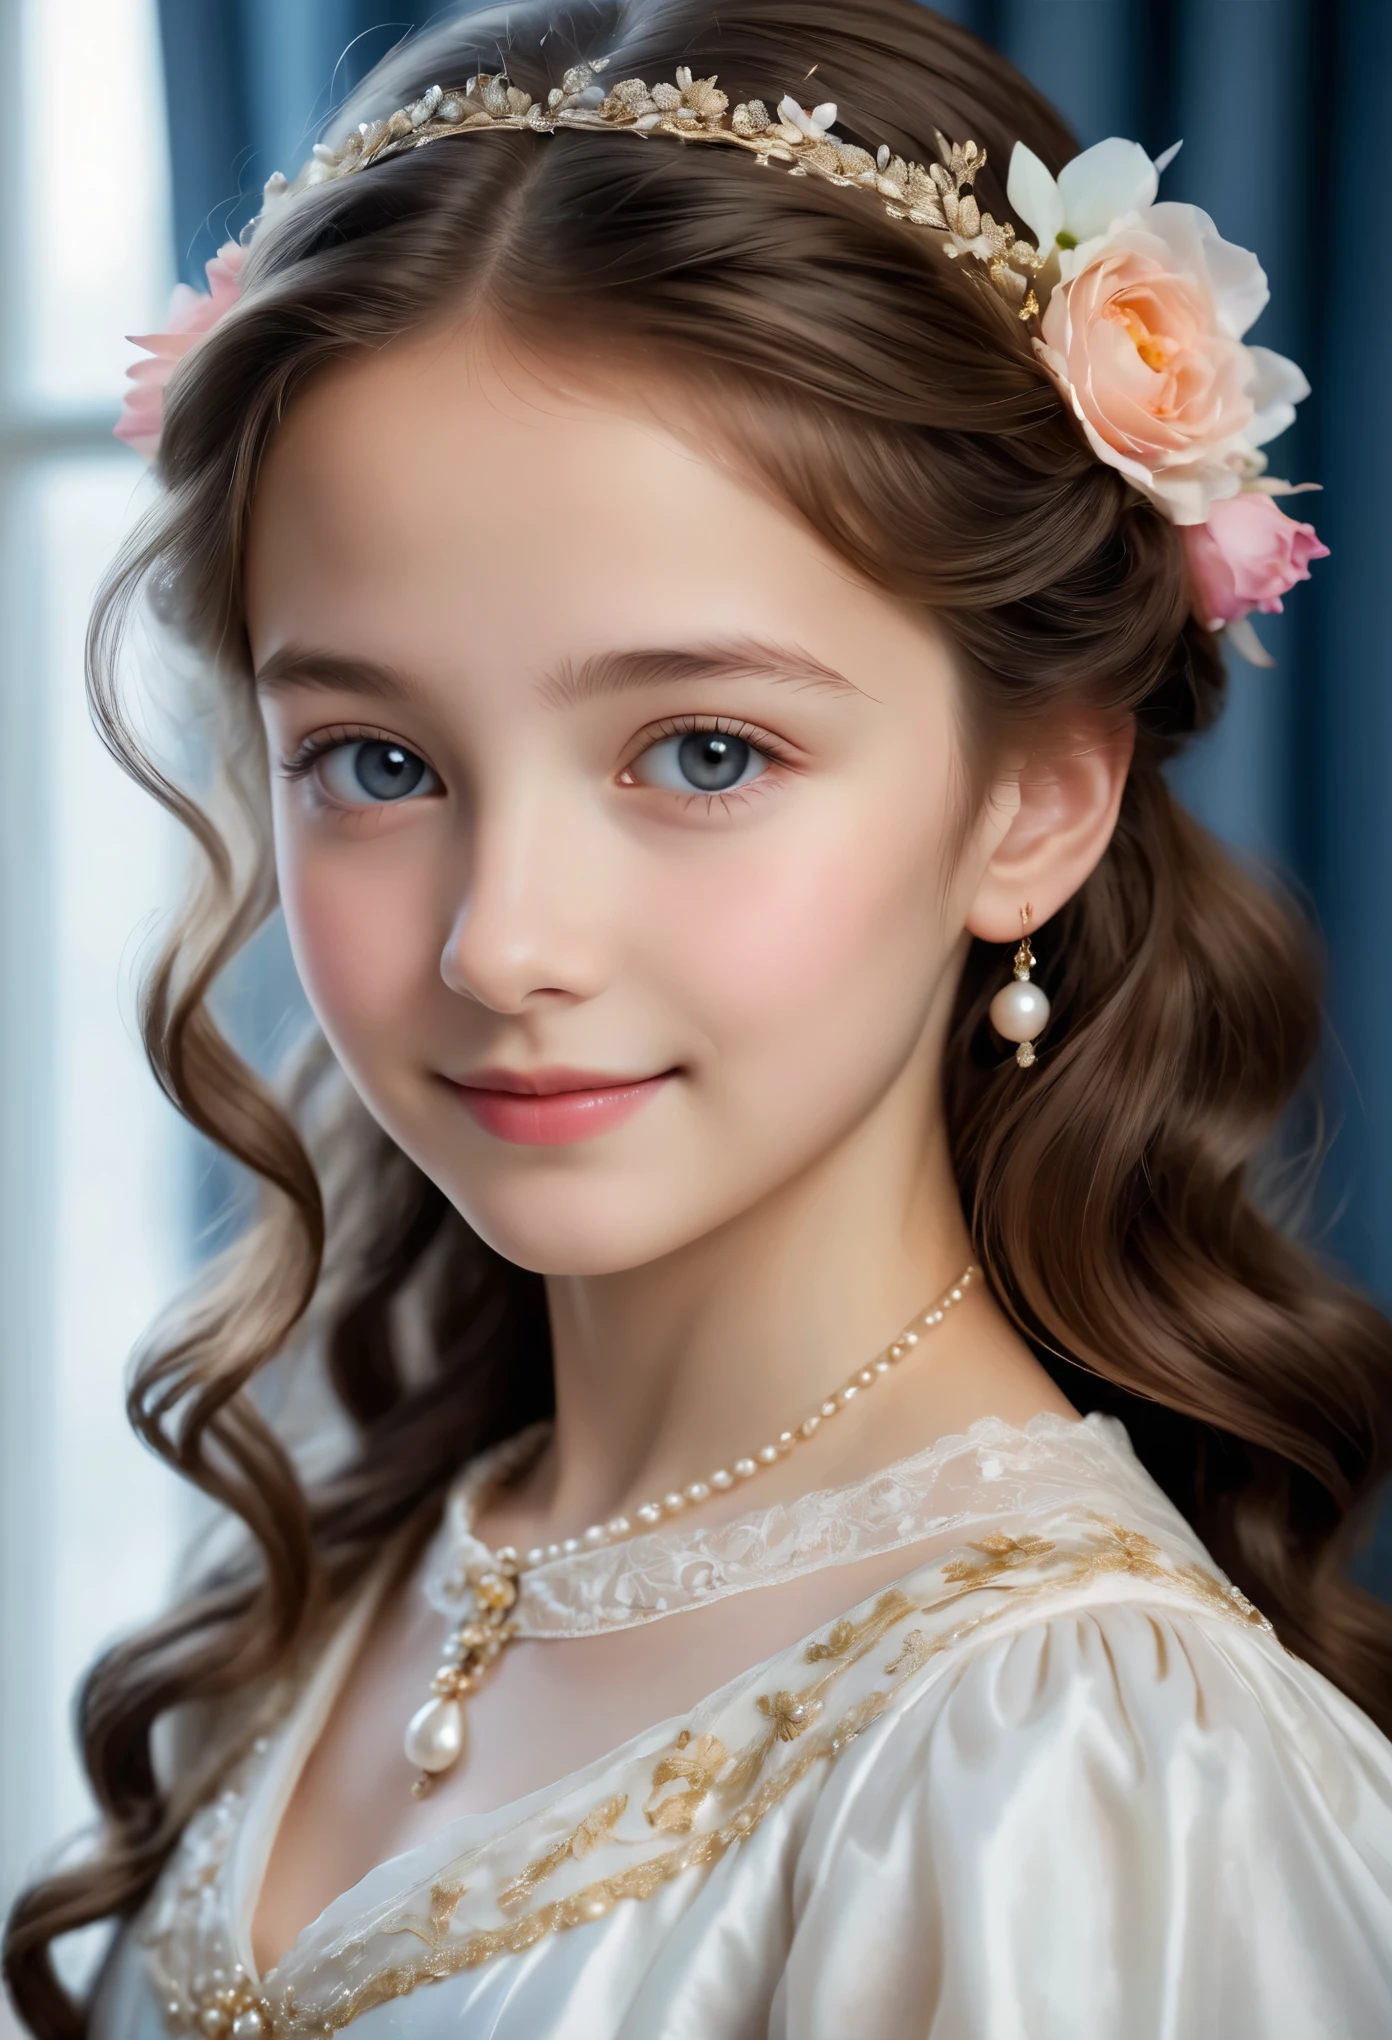 (best quality,4k,8k,highres,masterpiece:1.2), ultra-detailed, (realistic,photorealistic,photo-realistic:1.37),In the portrait of this enchanting 14-year-old girl, the daughter of a prosperous merchant during the flourishing 17th century in the Netherlands, every brushstroke captures the essence of her youth and innocence.

Her golden locks cascade in gentle waves, adorned with ribbons and pearls that speak of her family's affluence. Each curl seems to dance in the light, framing her cherubic face with an air of purity and grace. Her eyes, wide and bright, reflect the curiosity and wonder of childhood, as if every glance is filled with endless possibilities.

Her rosy cheeks flush with vitality, a testament to her health and happiness in the embrace of her privileged upbringing. A delicate dimple graces her smile, adding a touch of sweetness to her countenance that is as charming as it is captivating.

Dressed in the finest silks and lace, her gown whispers softly with every movement, a symphony of luxury and refinement. Embroidered motifs and intricate details adorn her attire, showcasing the exquisite craftsmanship of the era and her family's esteemed status in society.

In her hands, she holds a posy of fresh flowers, their vibrant colors mirroring the bloom of her youth. With each delicate petal, she seems to embody the essence of spring itself, a beacon of hope and renewal in a world filled with uncertainty.

This portrait of the 14-year-old daughter of a prosperous Dutch merchant is not just a representation of beauty; it's a window into a bygone era of elegance, privilege, and the timeless innocence of youth.